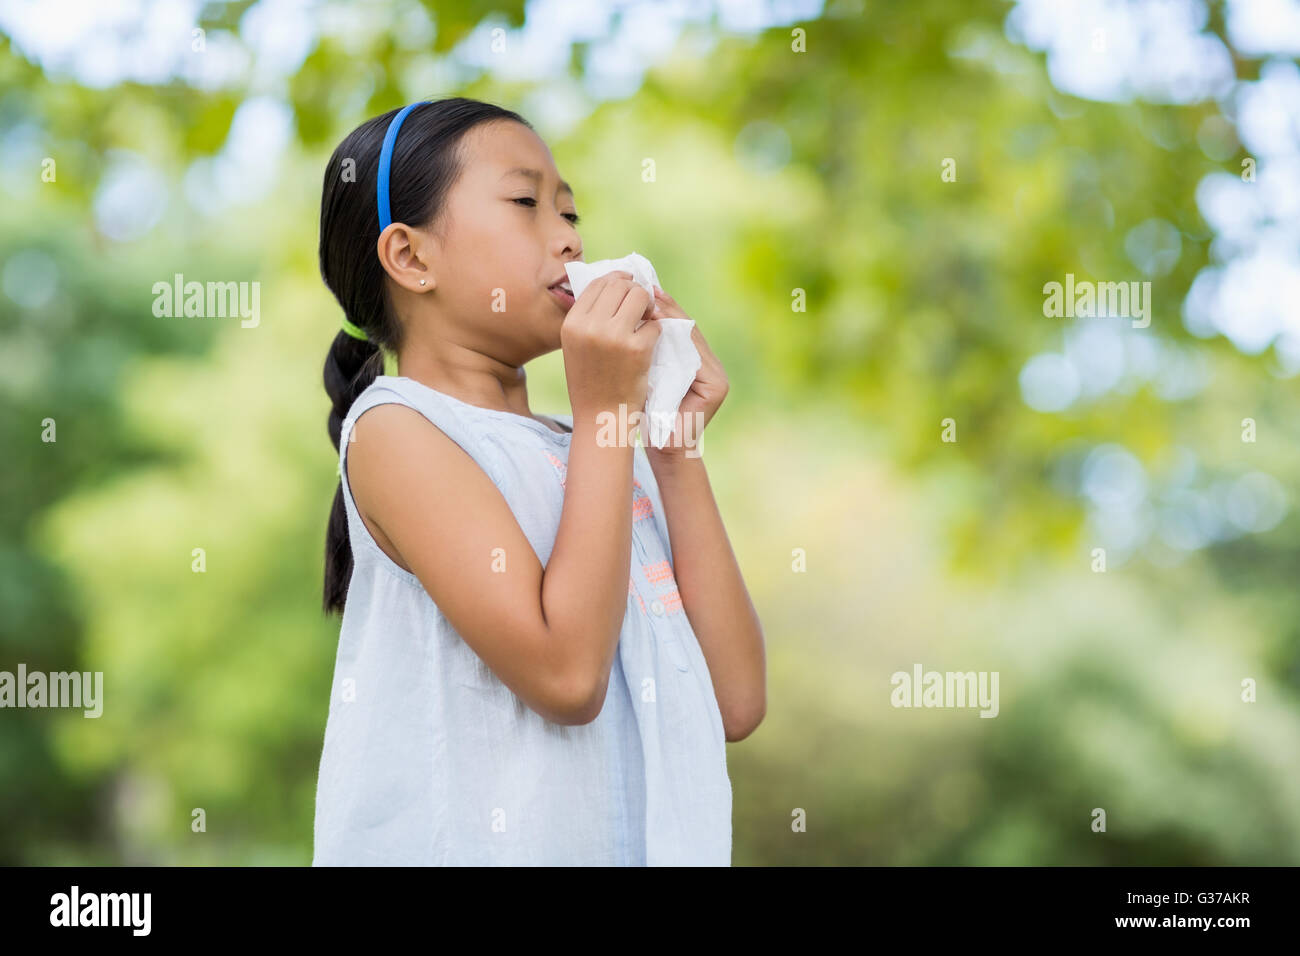 Girl blowing her nose with handkerchief while sneezing Stock Photo